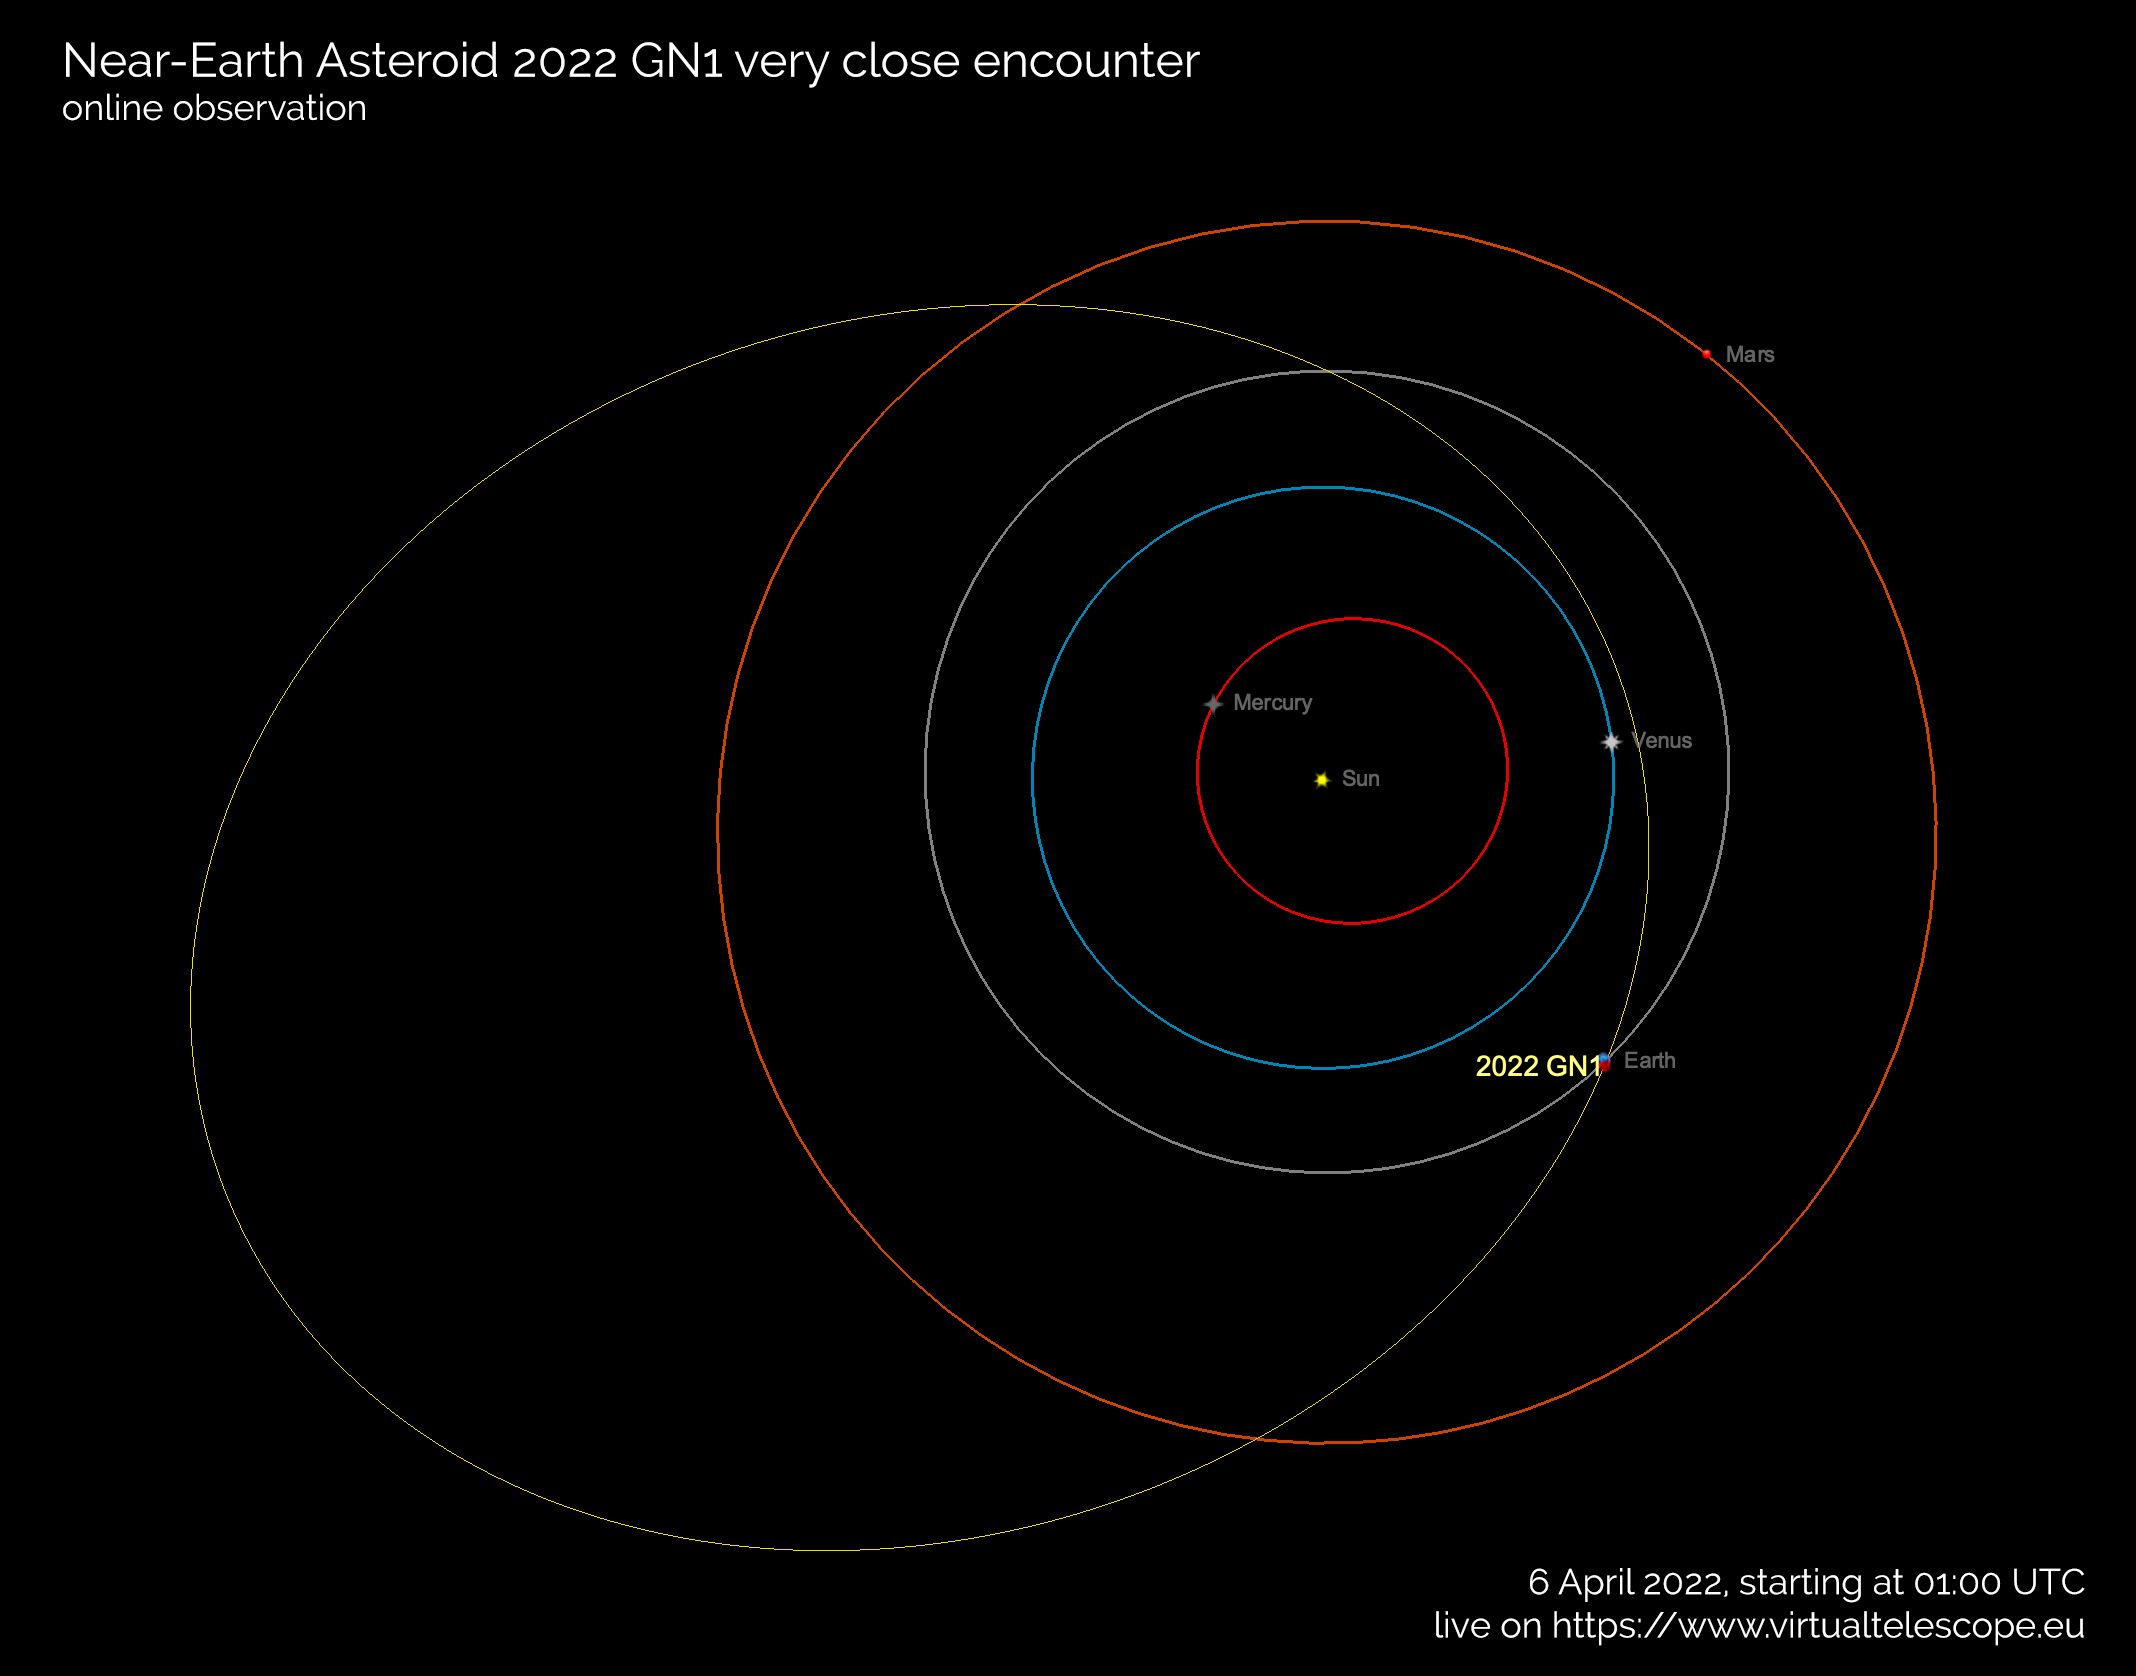 Near-Earth asteroid 2022 GN1: poster of the event.